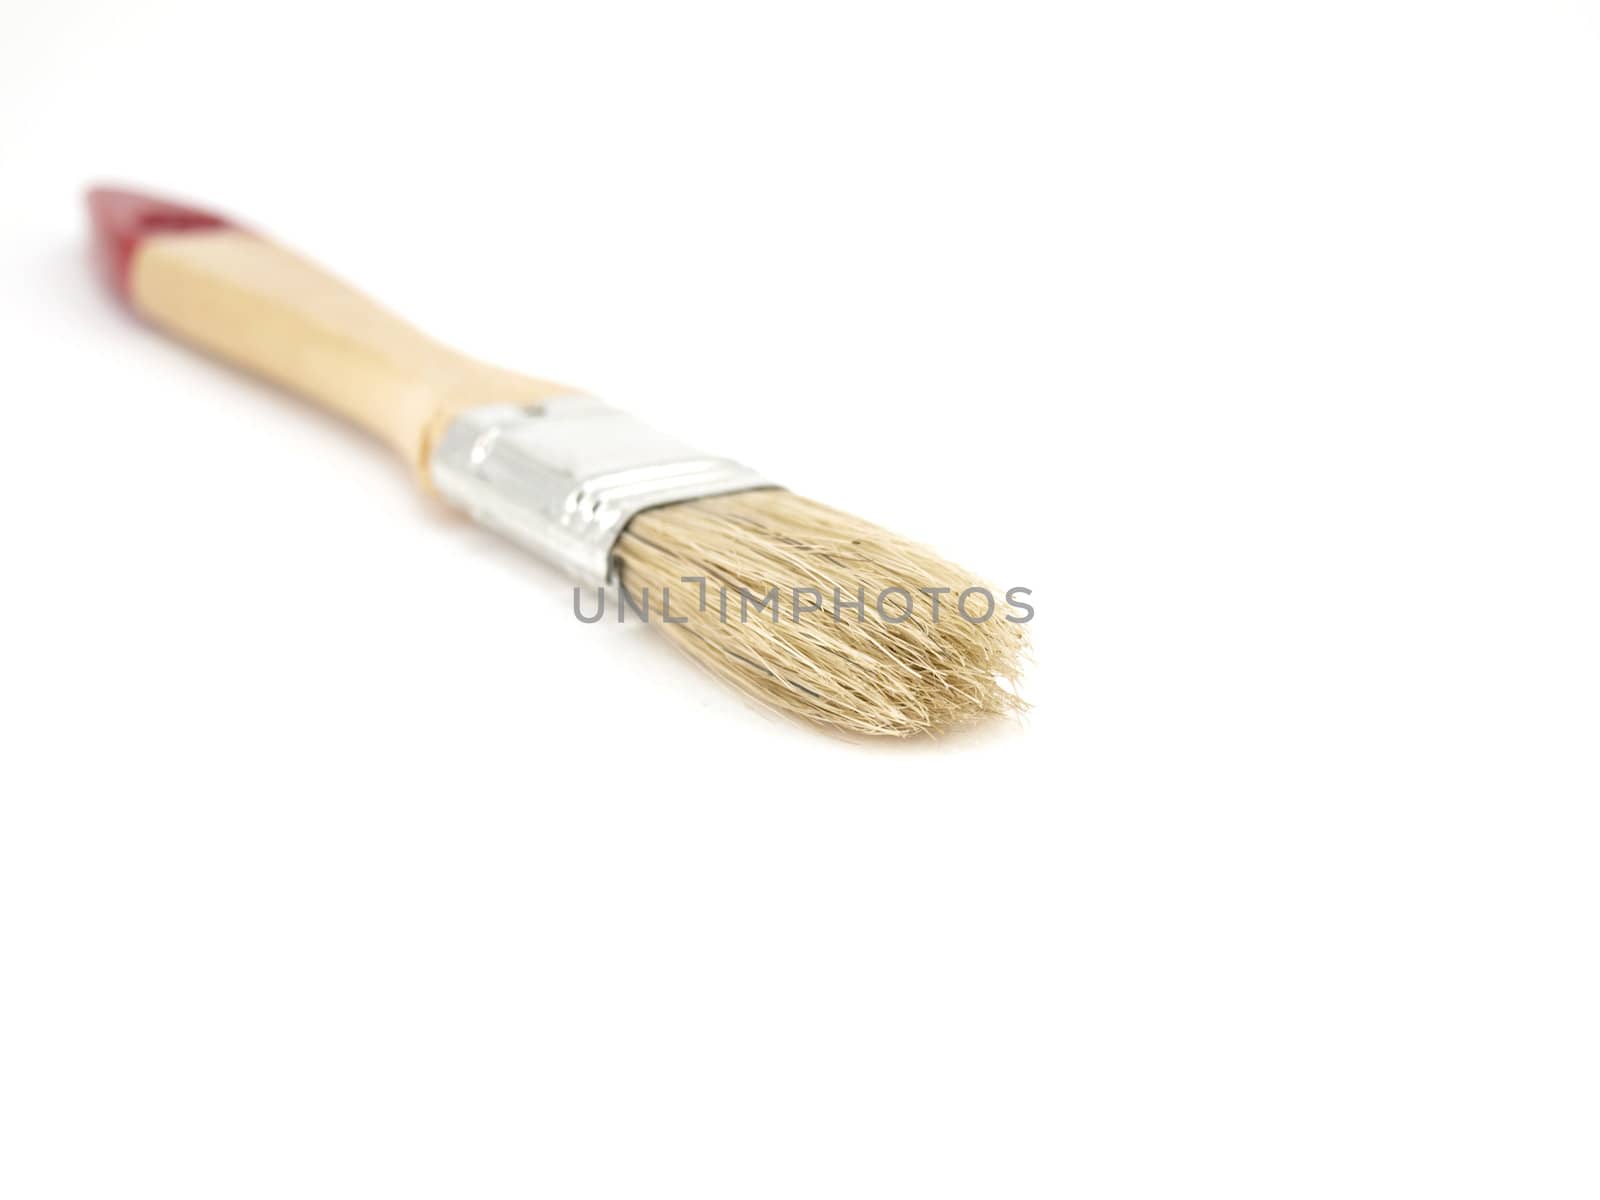 Paint brush with handle by sergpet